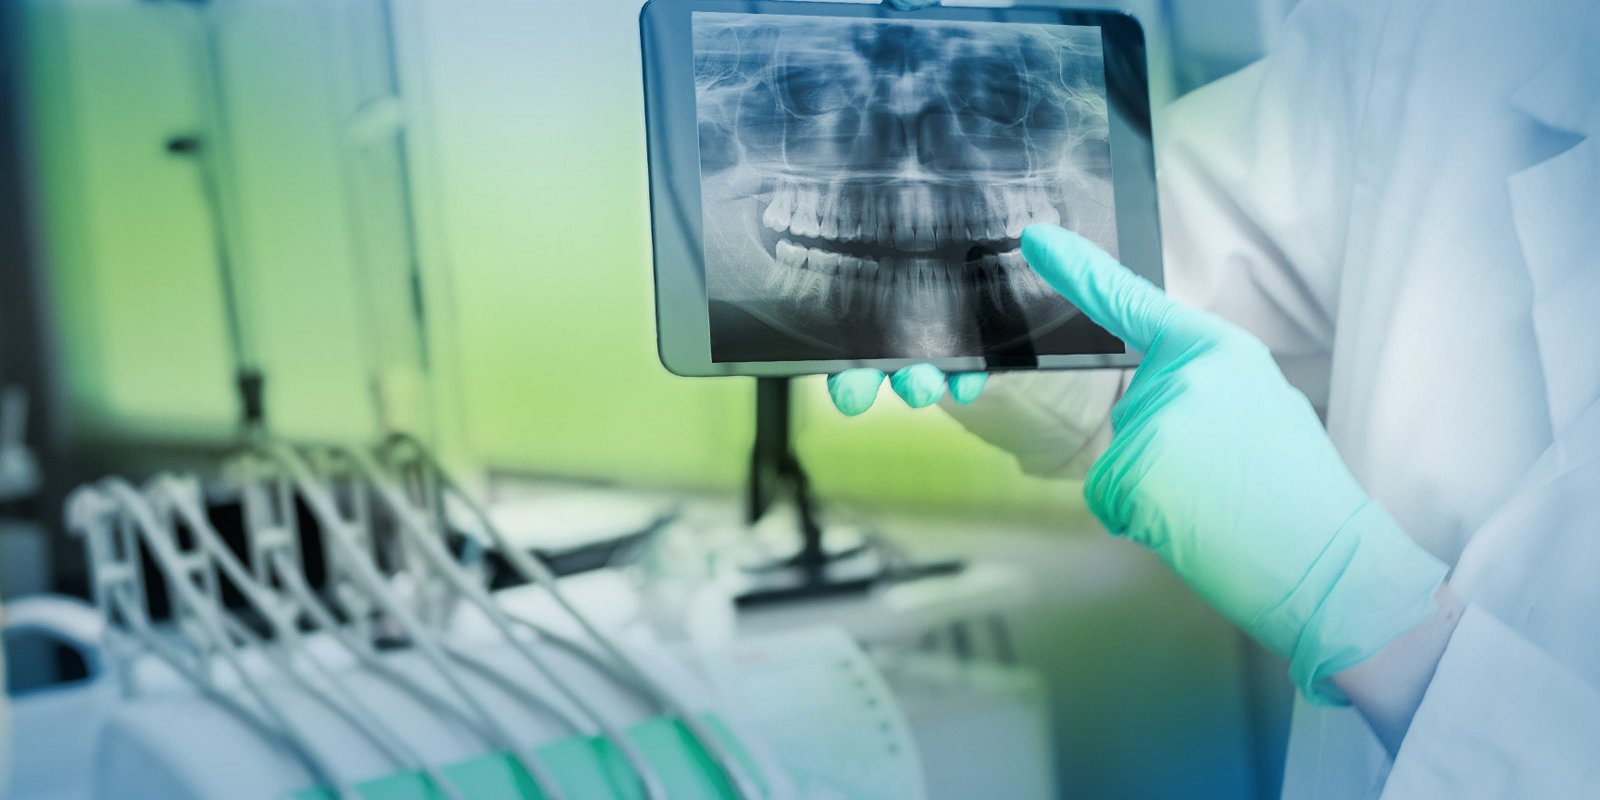 ACCC Proposes Authorising Australian Private Health Insurer to Set Prices on Dental Services